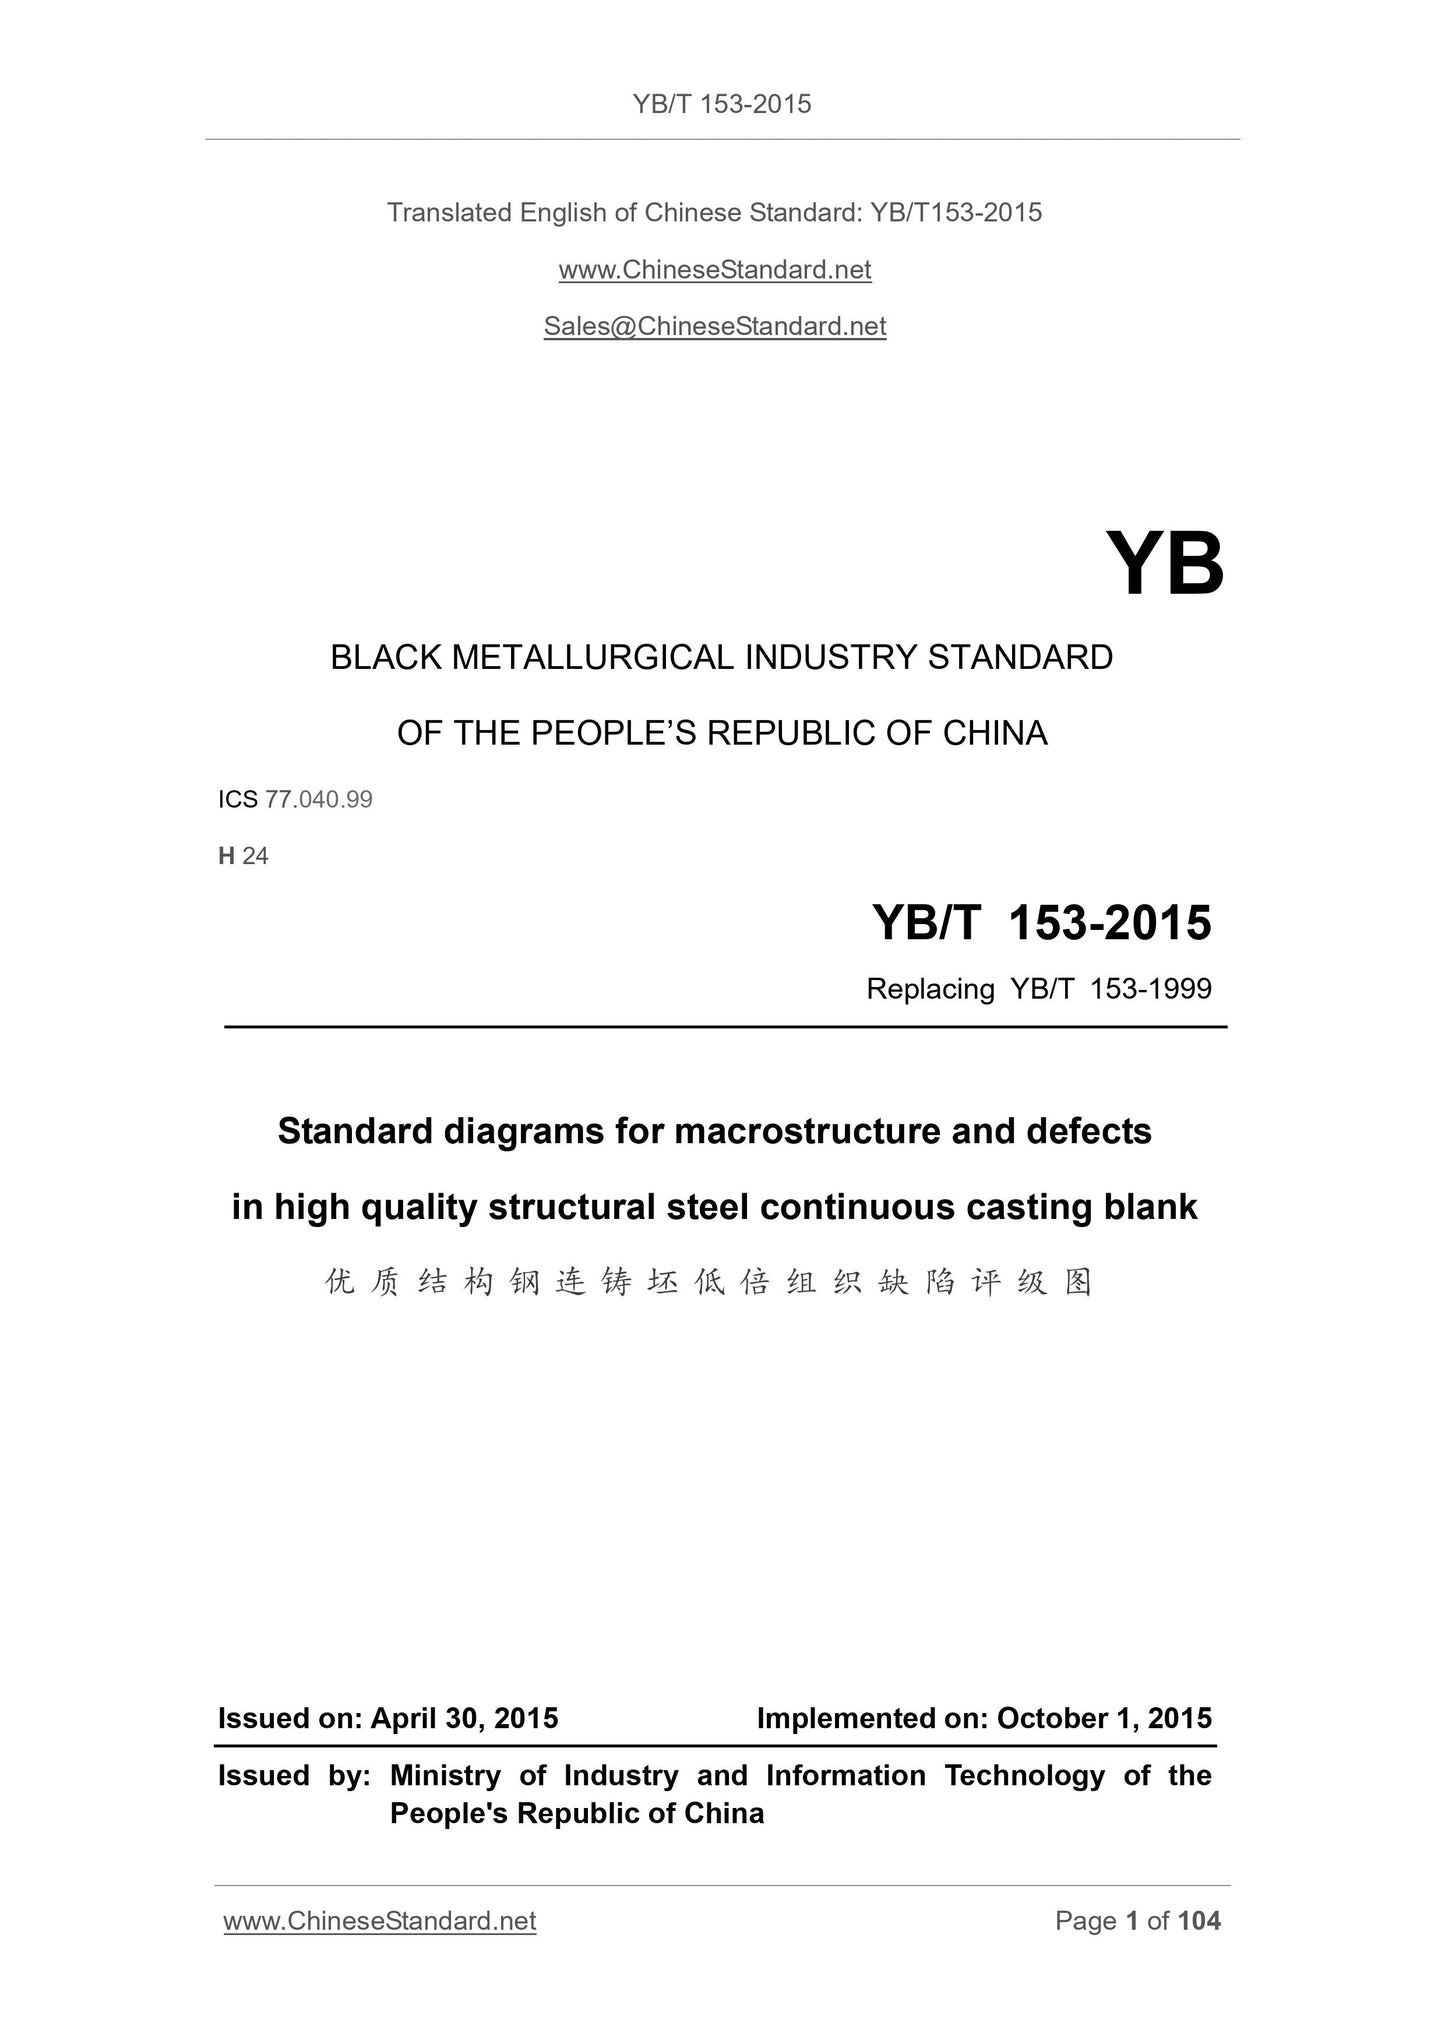 YB/T 153-2015 Page 1